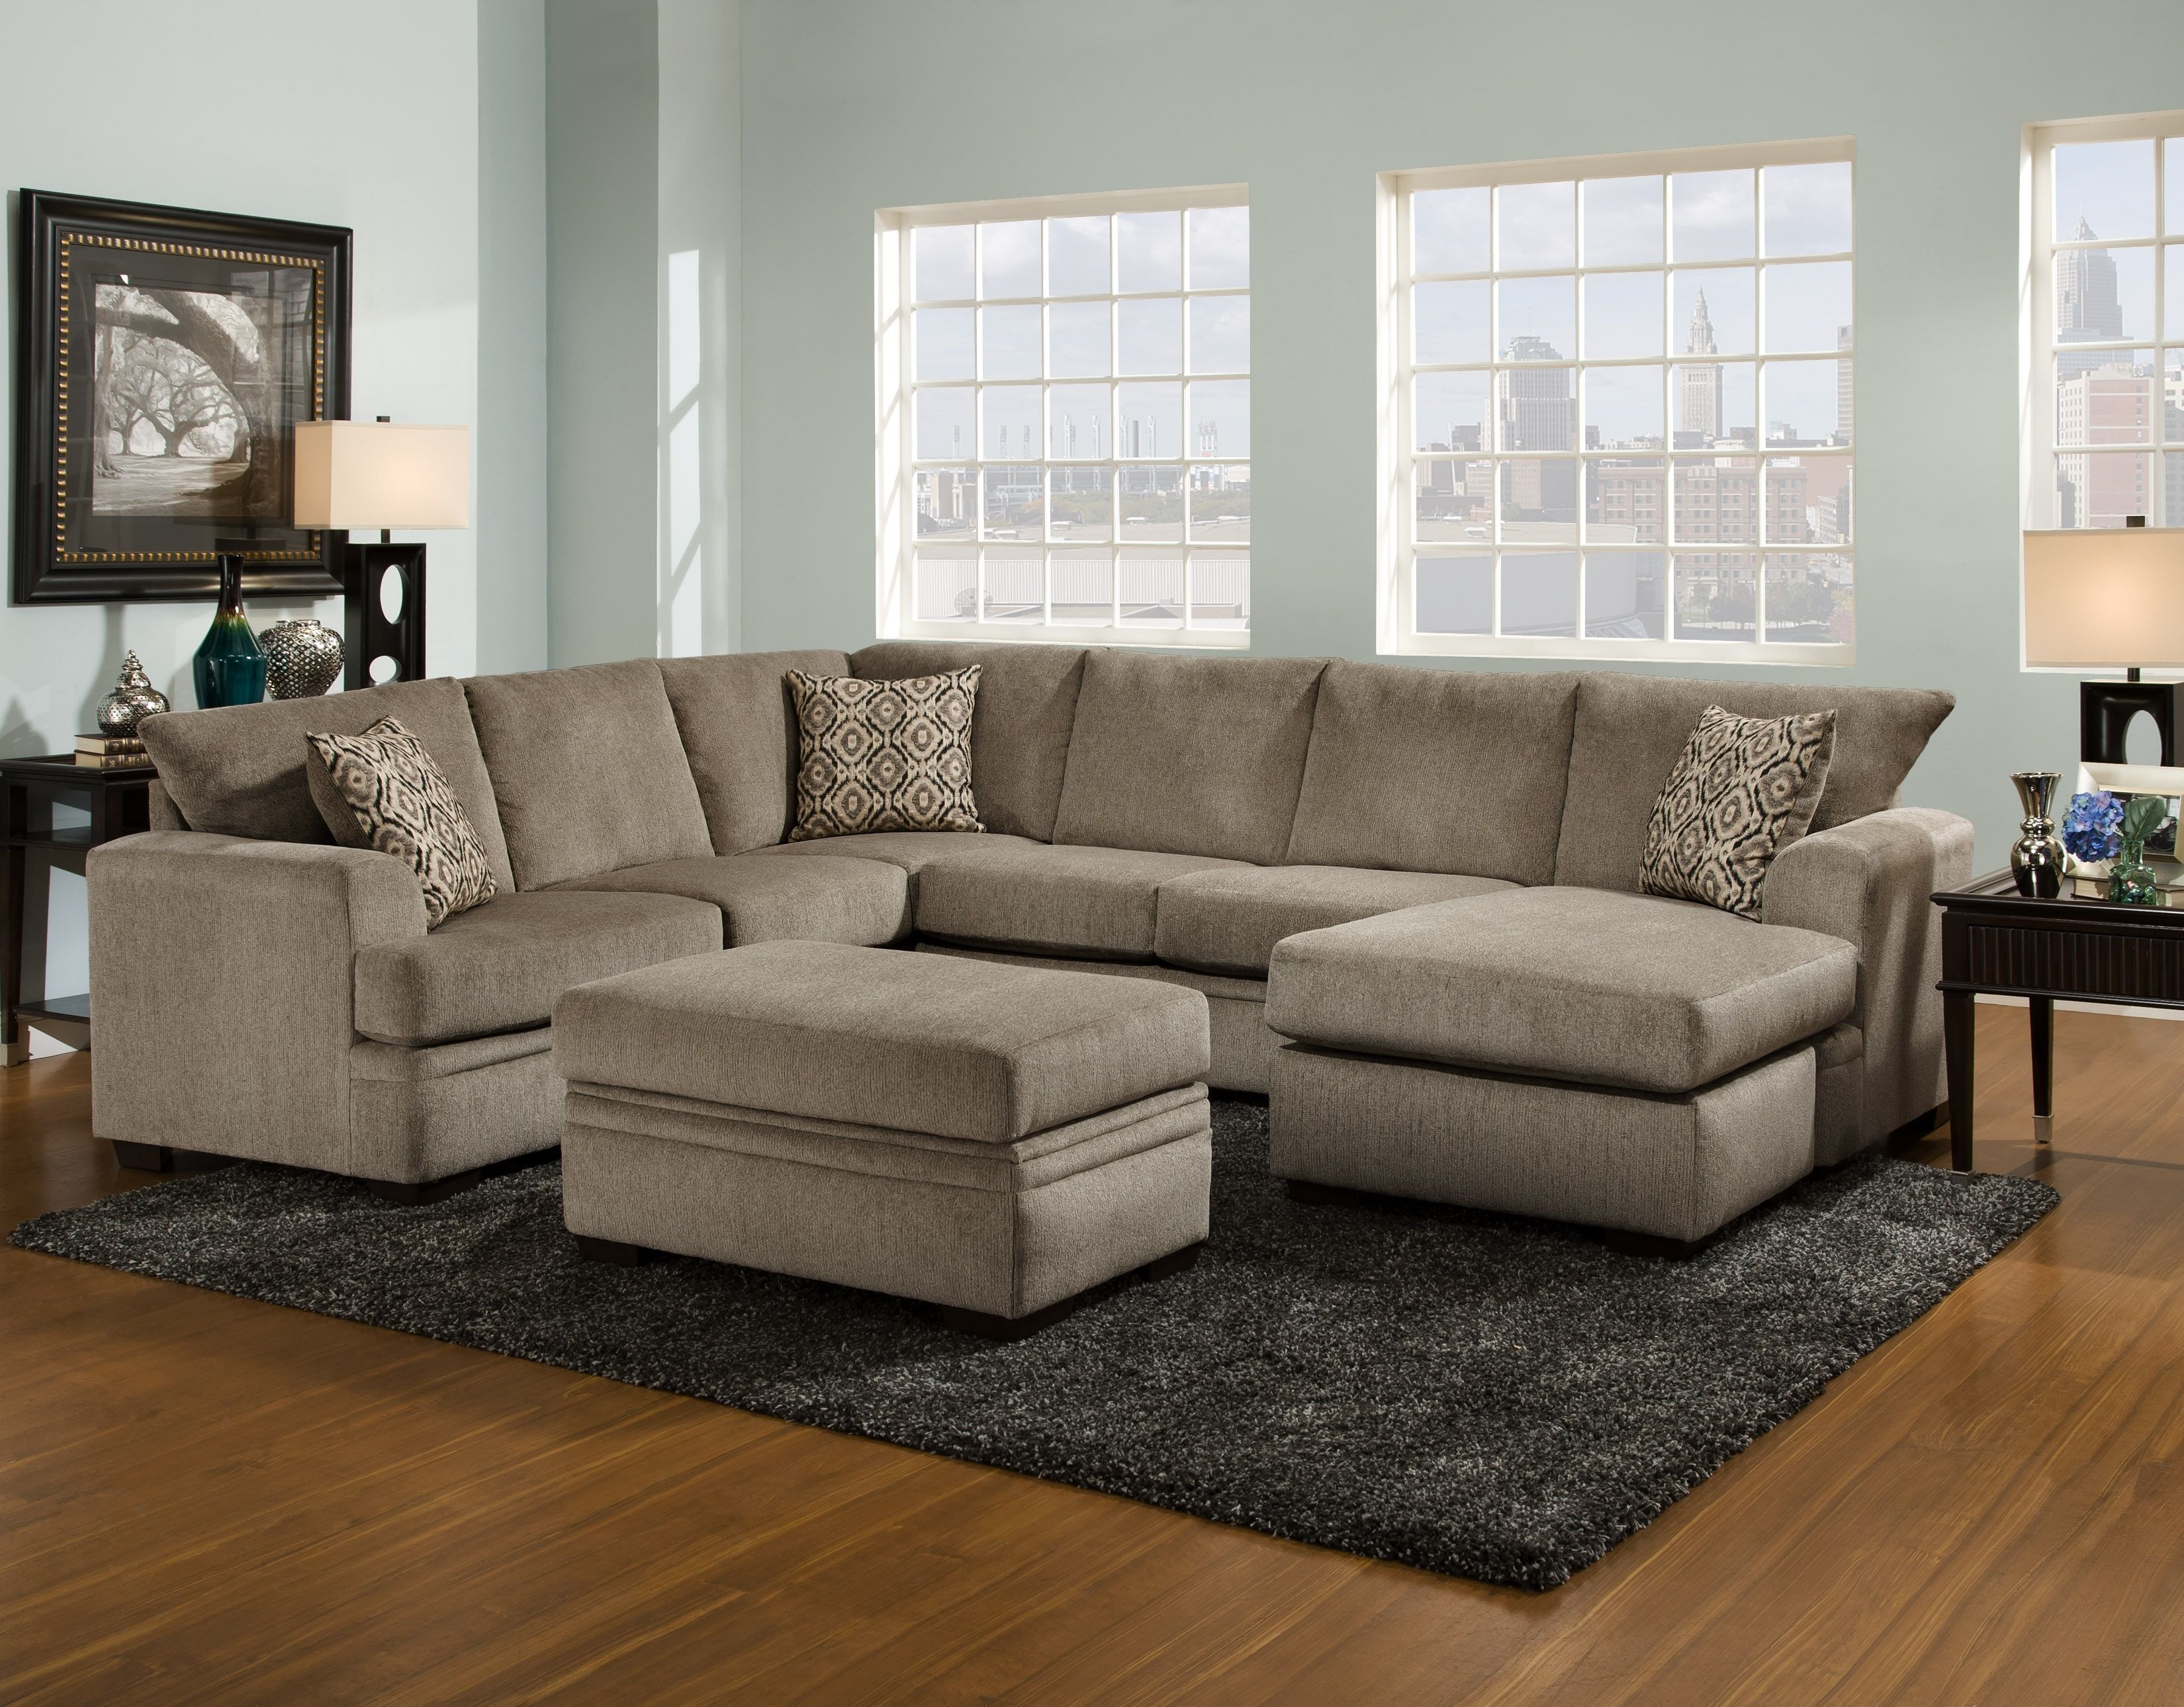 Living Room – Crazy Joe's Best Deal Furniture Within Janesville Wi Sectional Sofas (View 1 of 10)